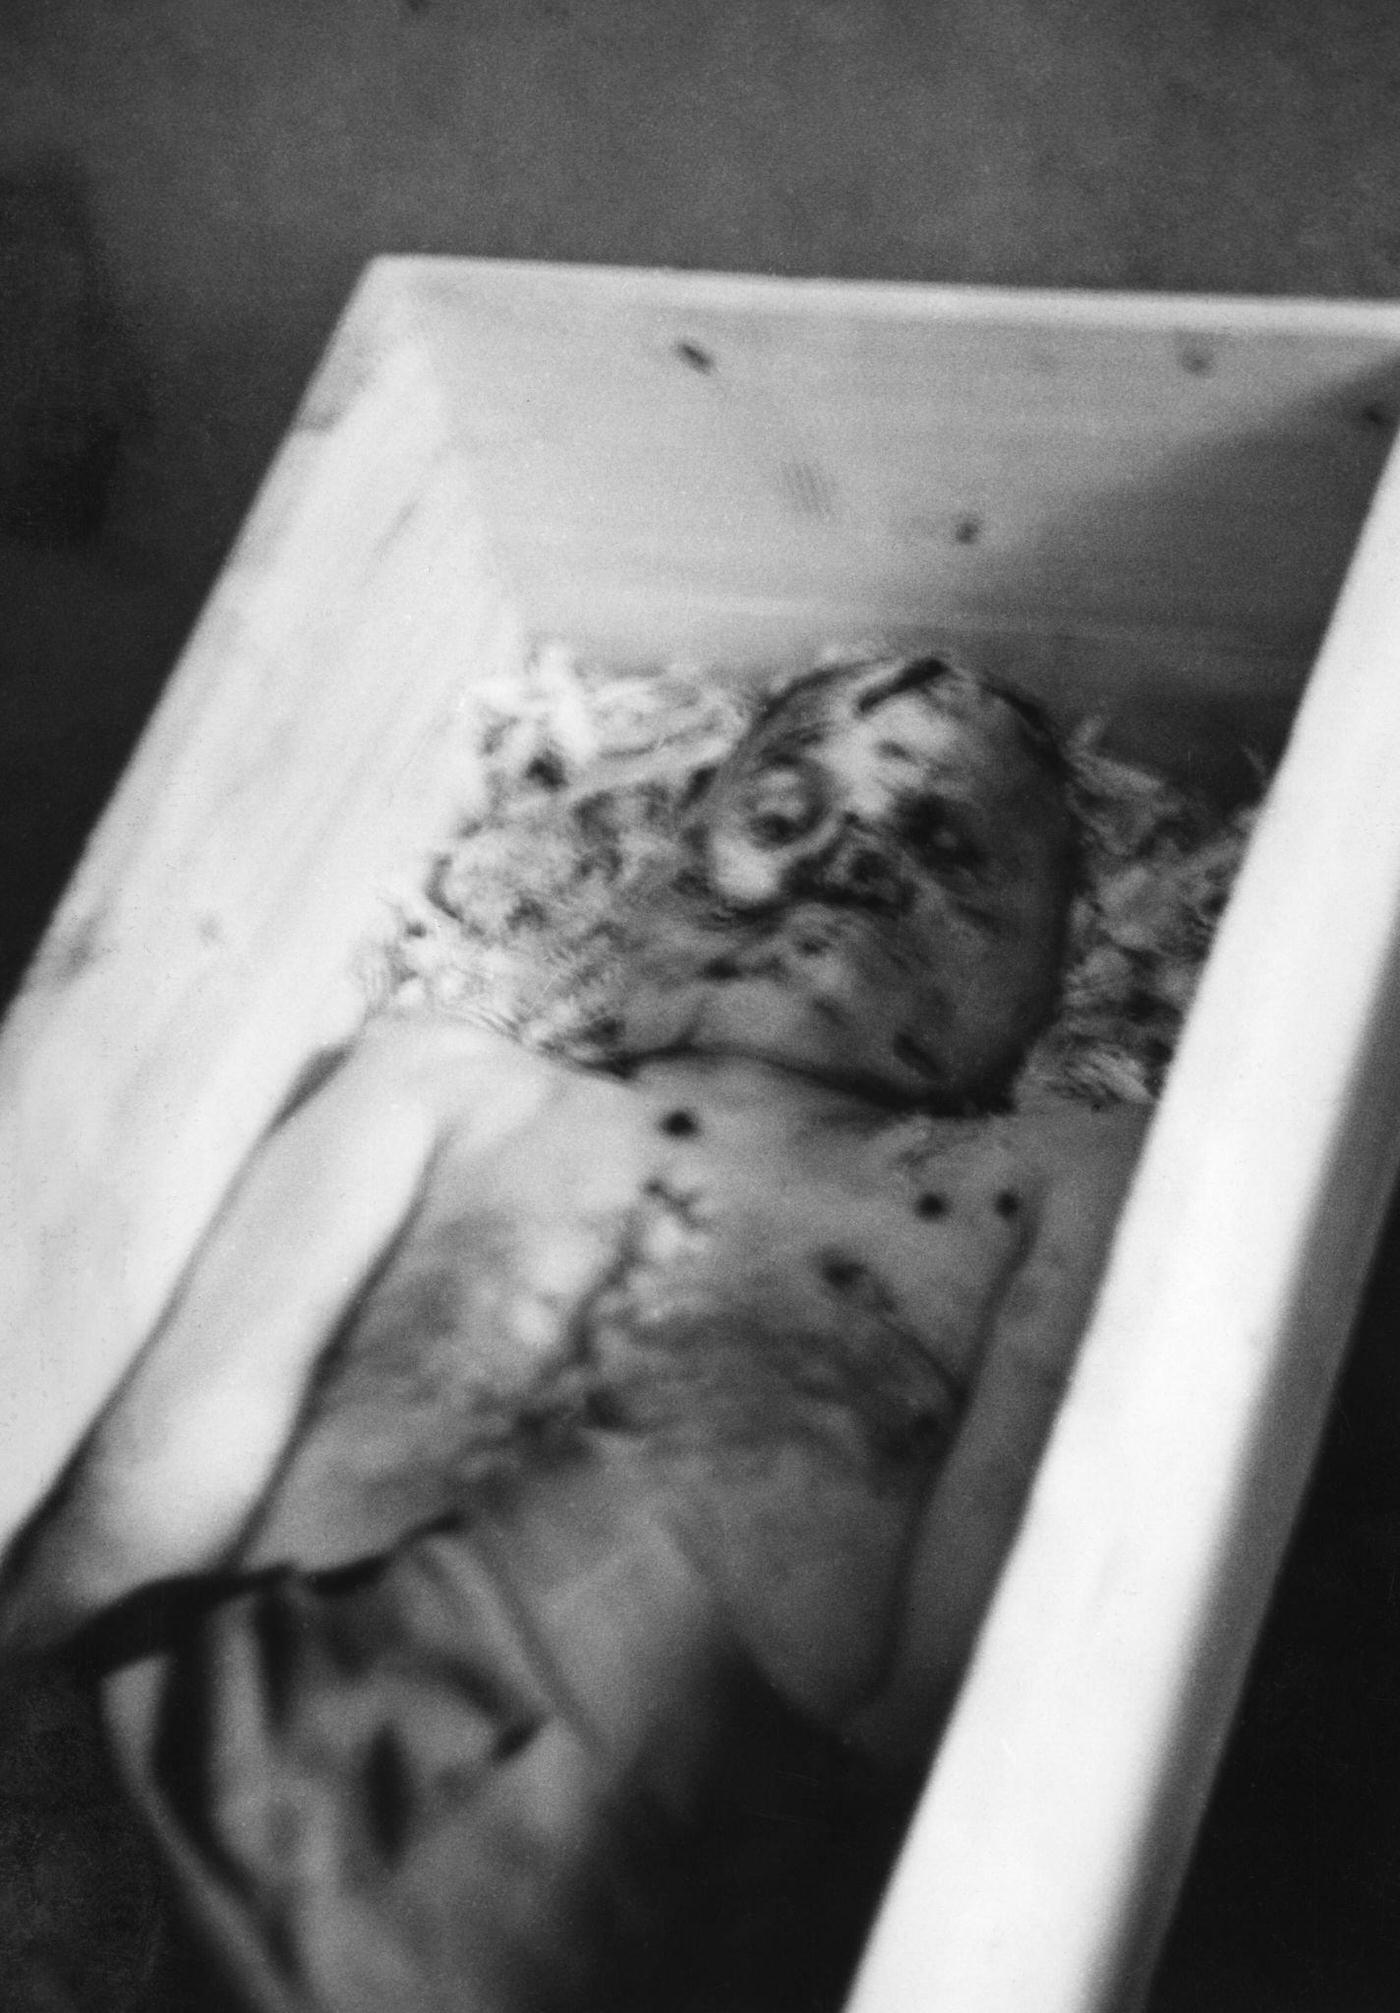 Benito Mussolini's Corpse in Coffin Viewed by Italians in Milan, 1945